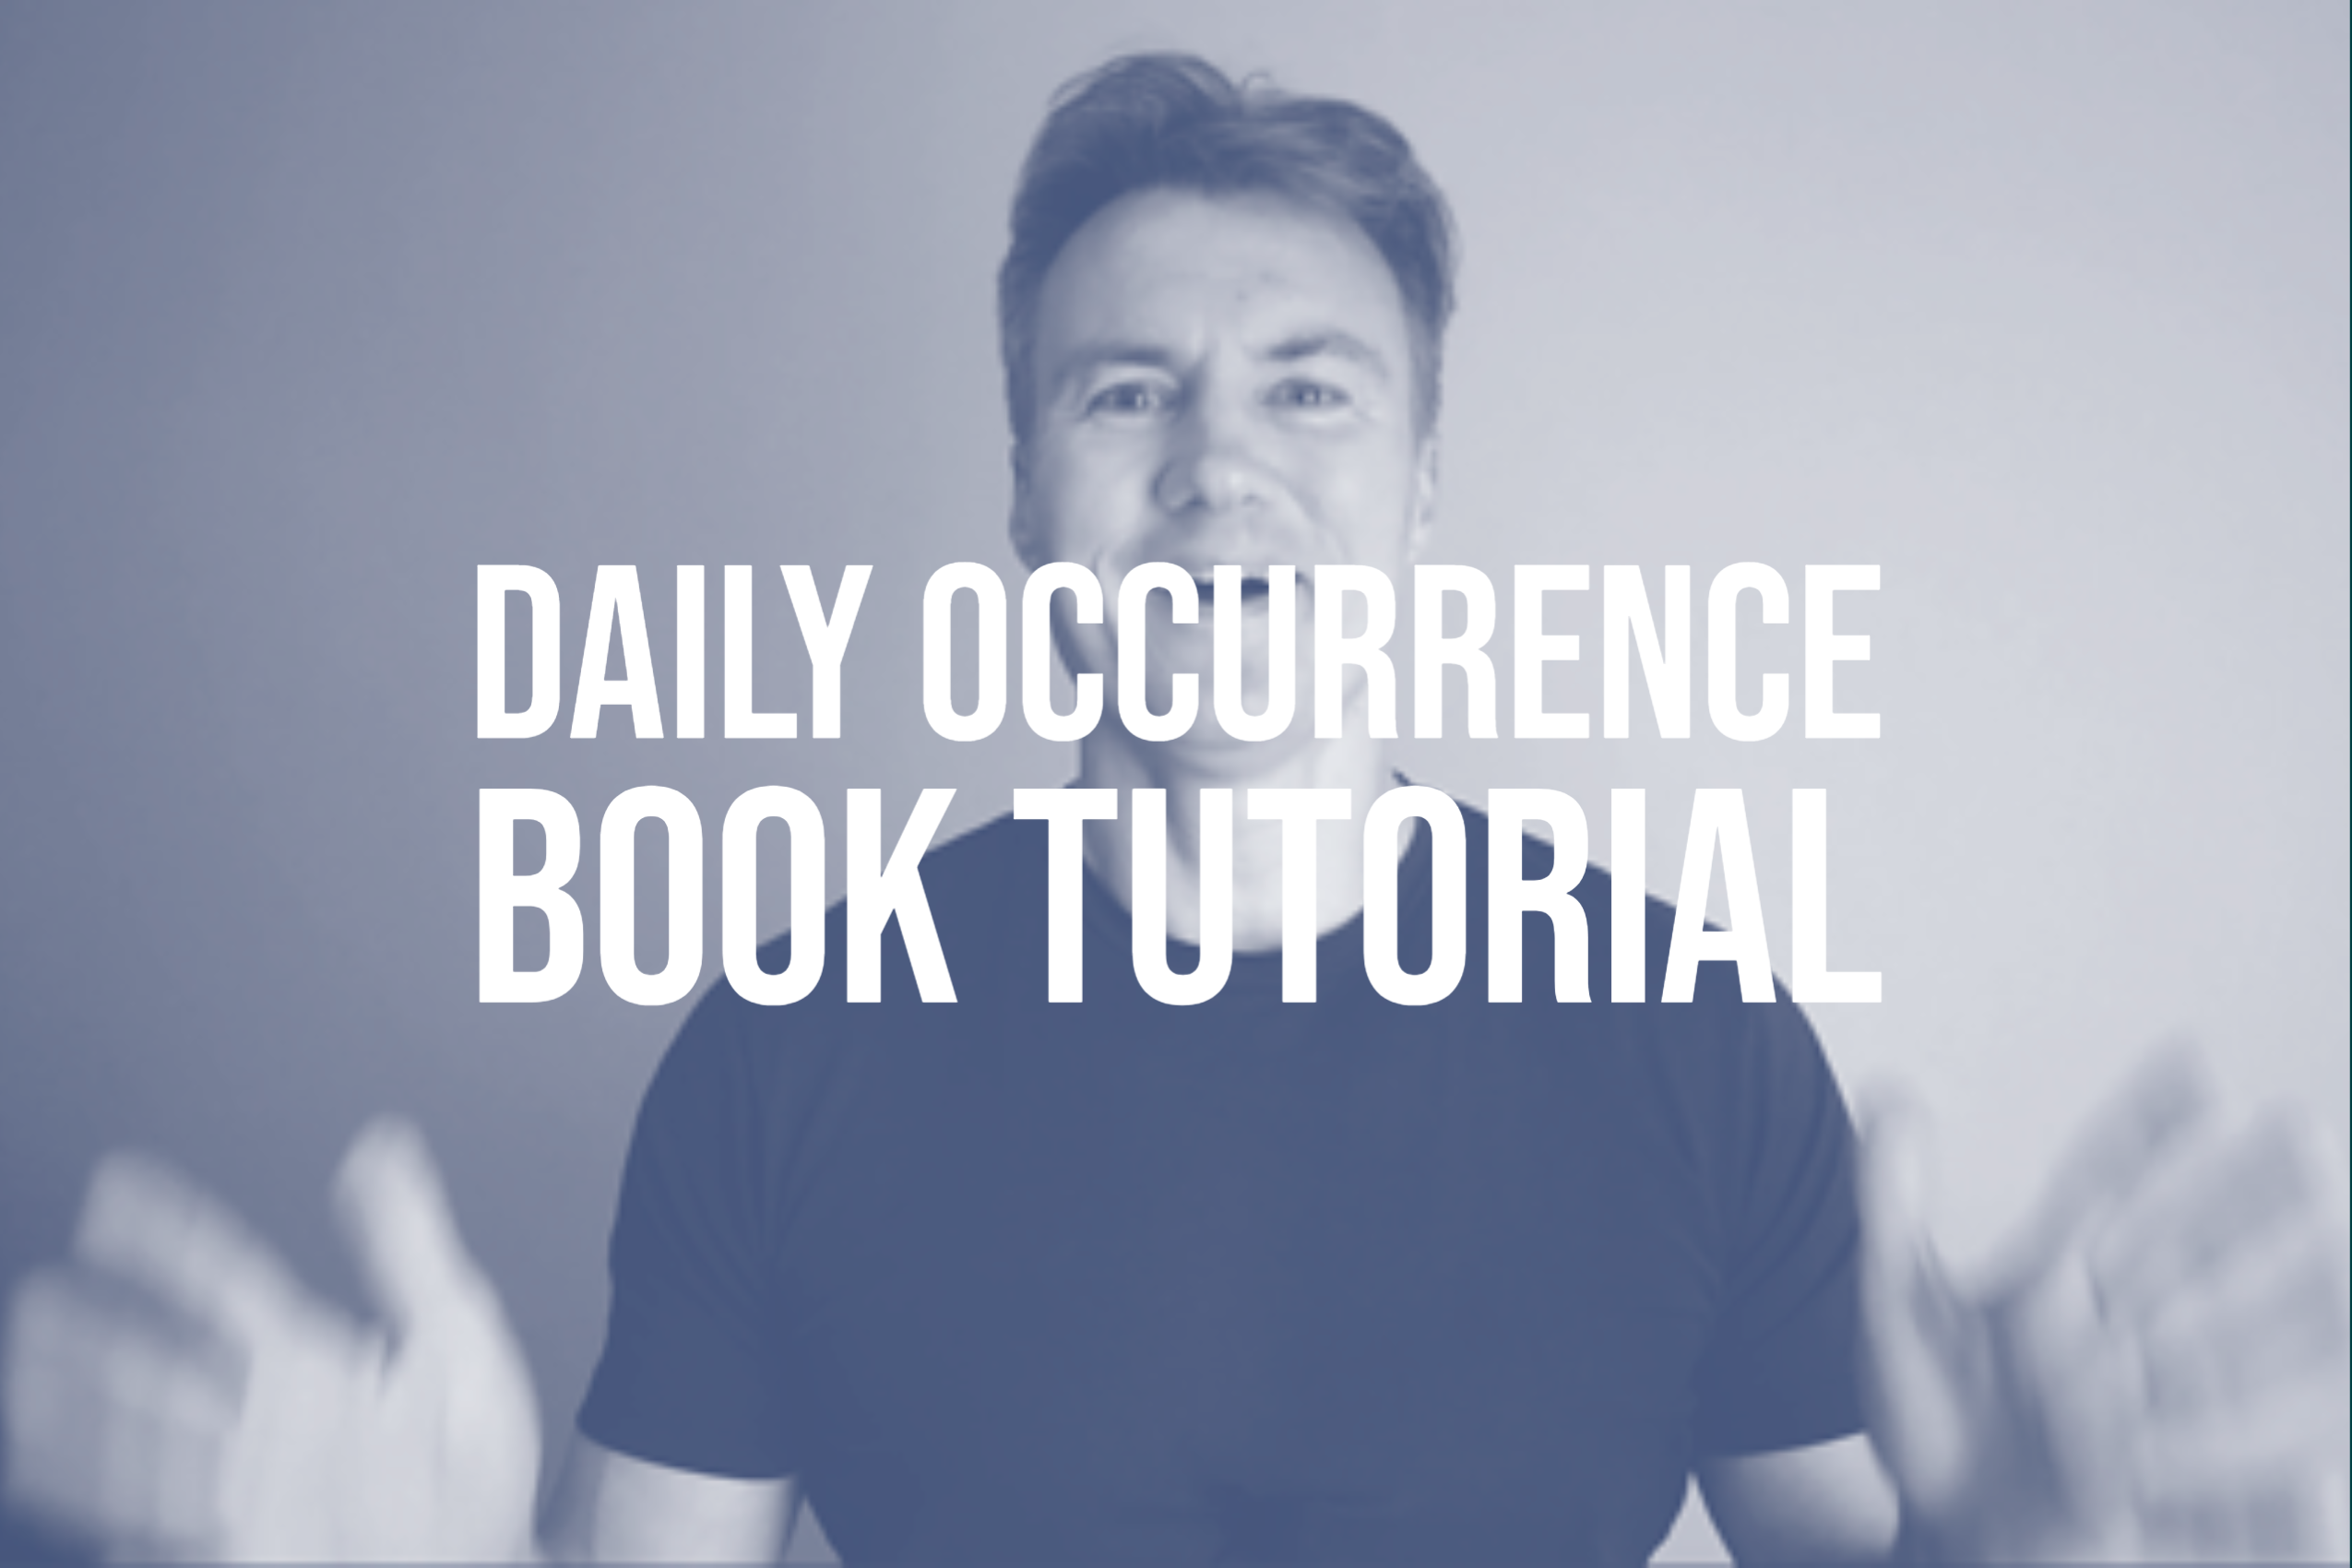 Daily Occurrence Book DOB Tutorial Article by SIRV